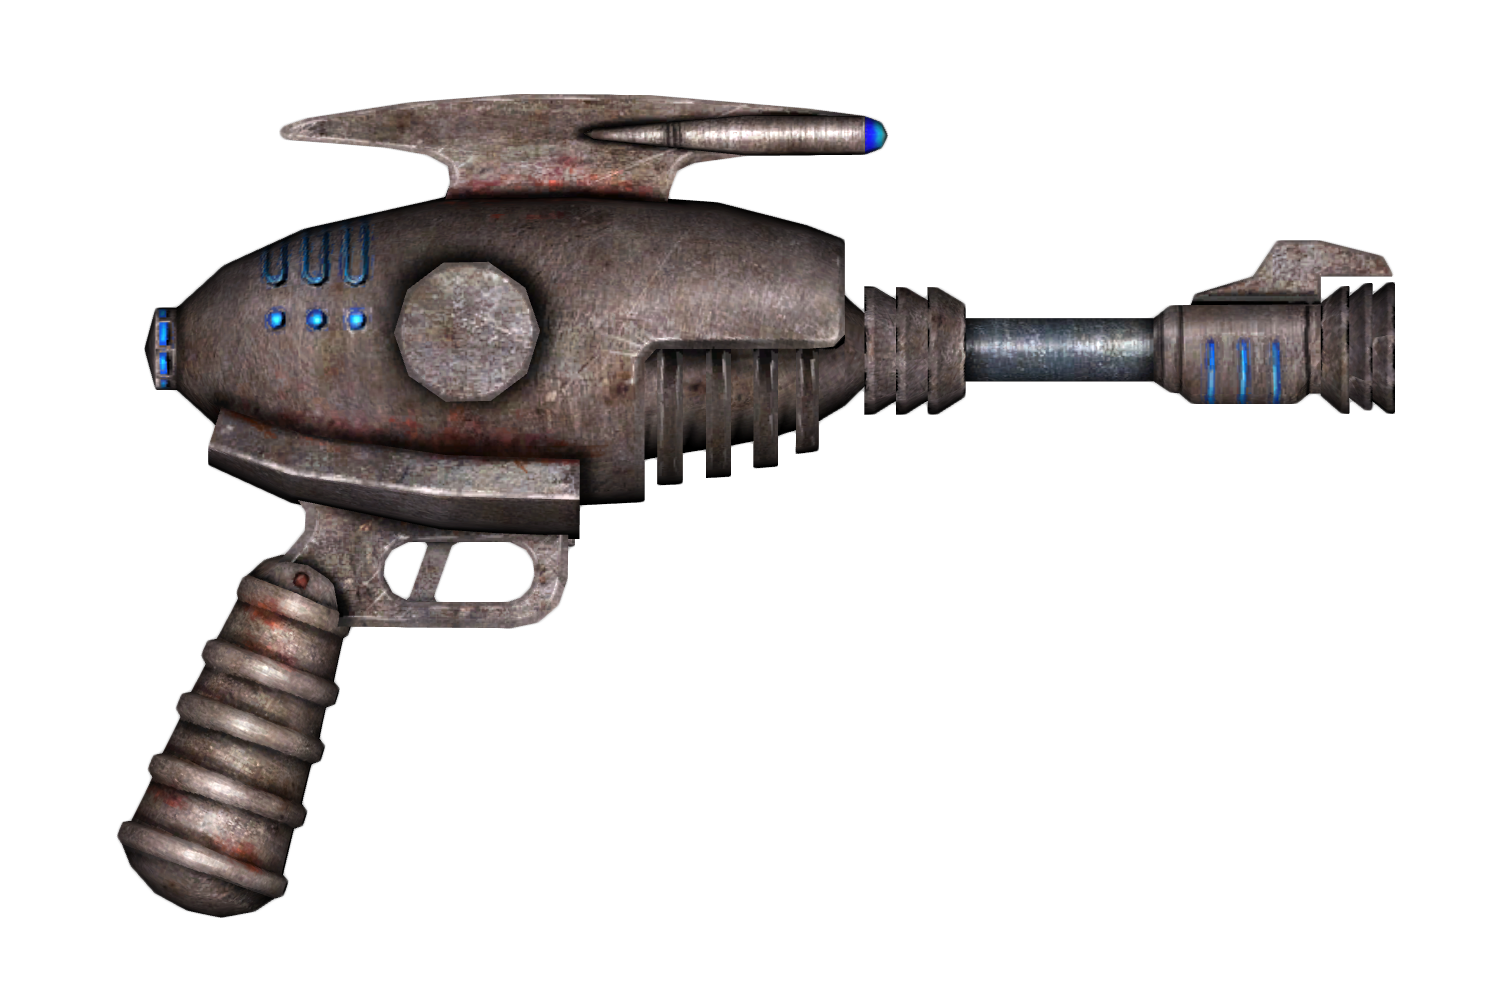 new vegas special weapons